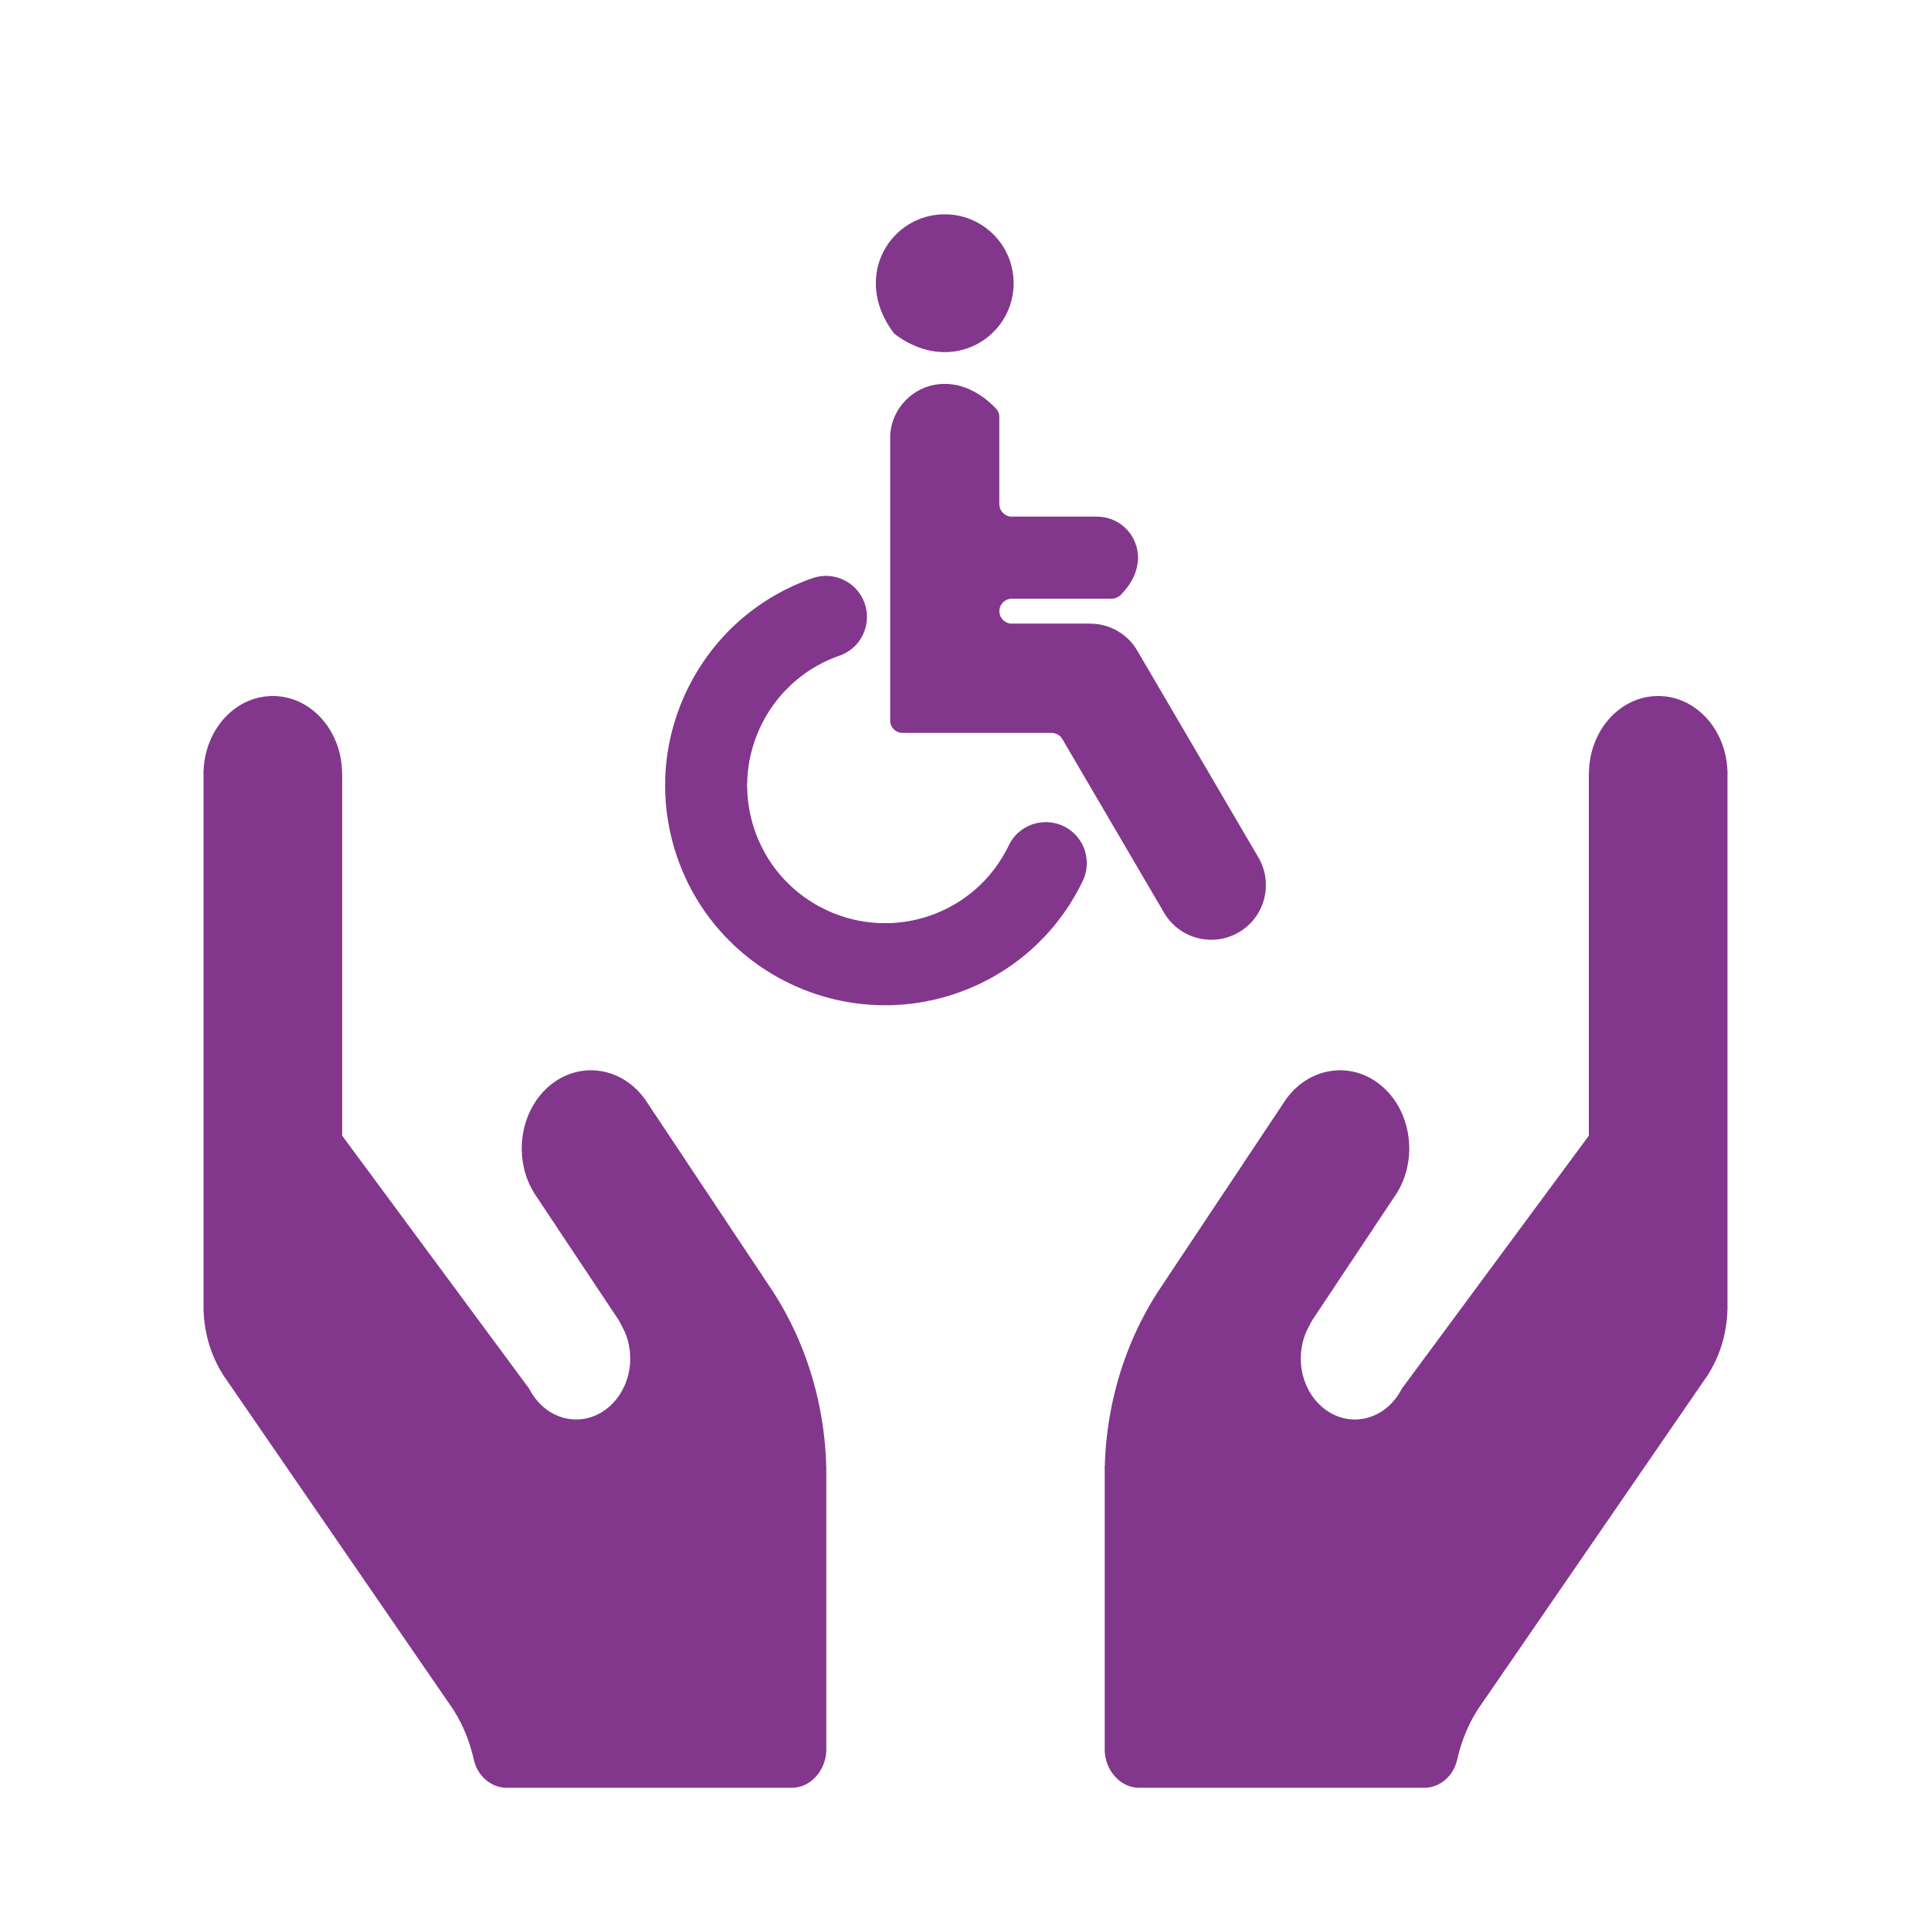 Support Disability